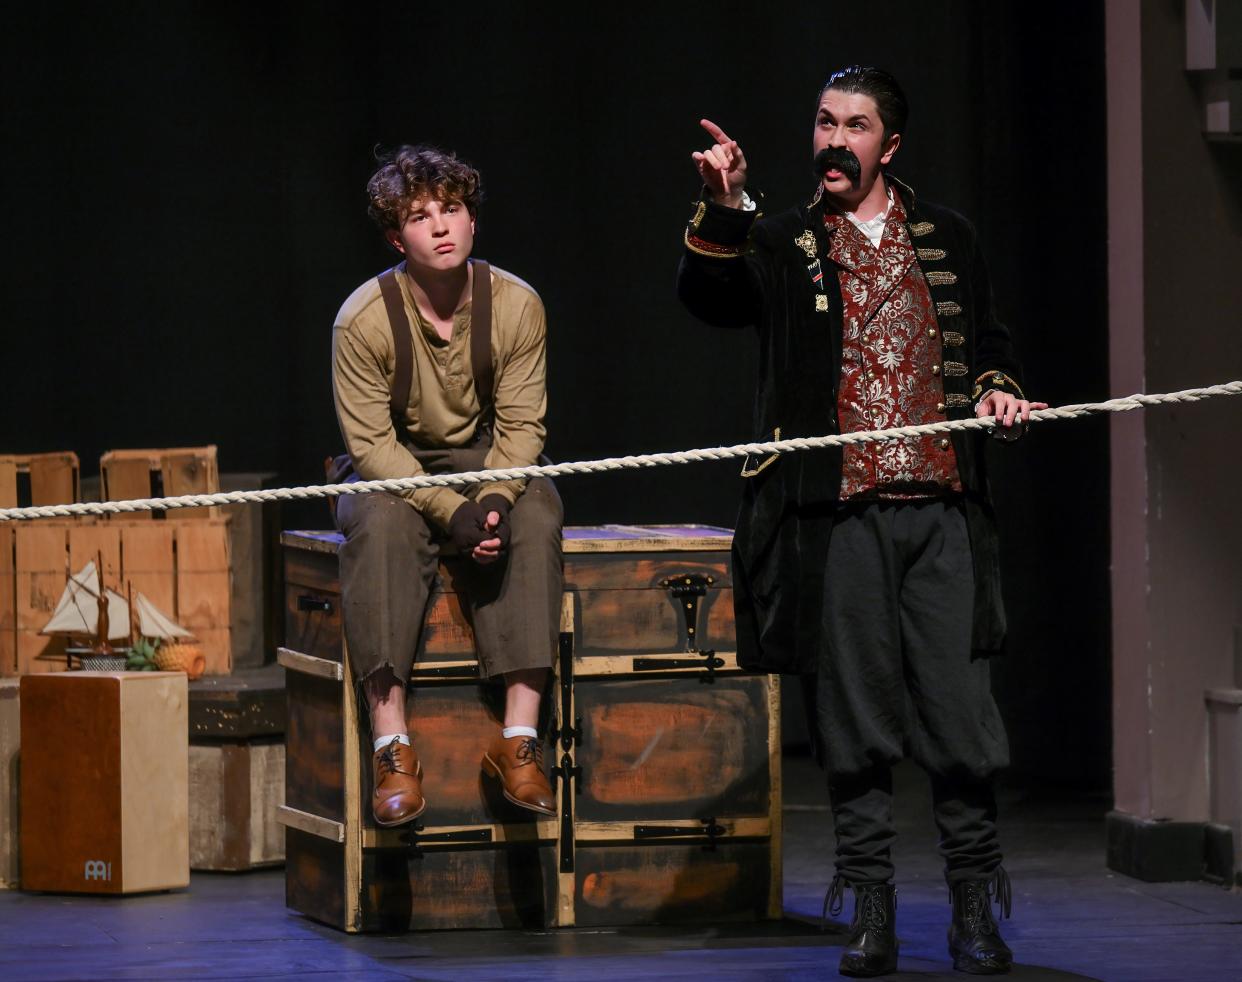 Savannah Country Day School students Daniel Bosch (left) and Ben Templeton act out a scene from "Peter and the Starcatcher' this past fall. Both actors won individual awards at the 2023 GHSA regional and state competitions in addition to the cast's overall wins.